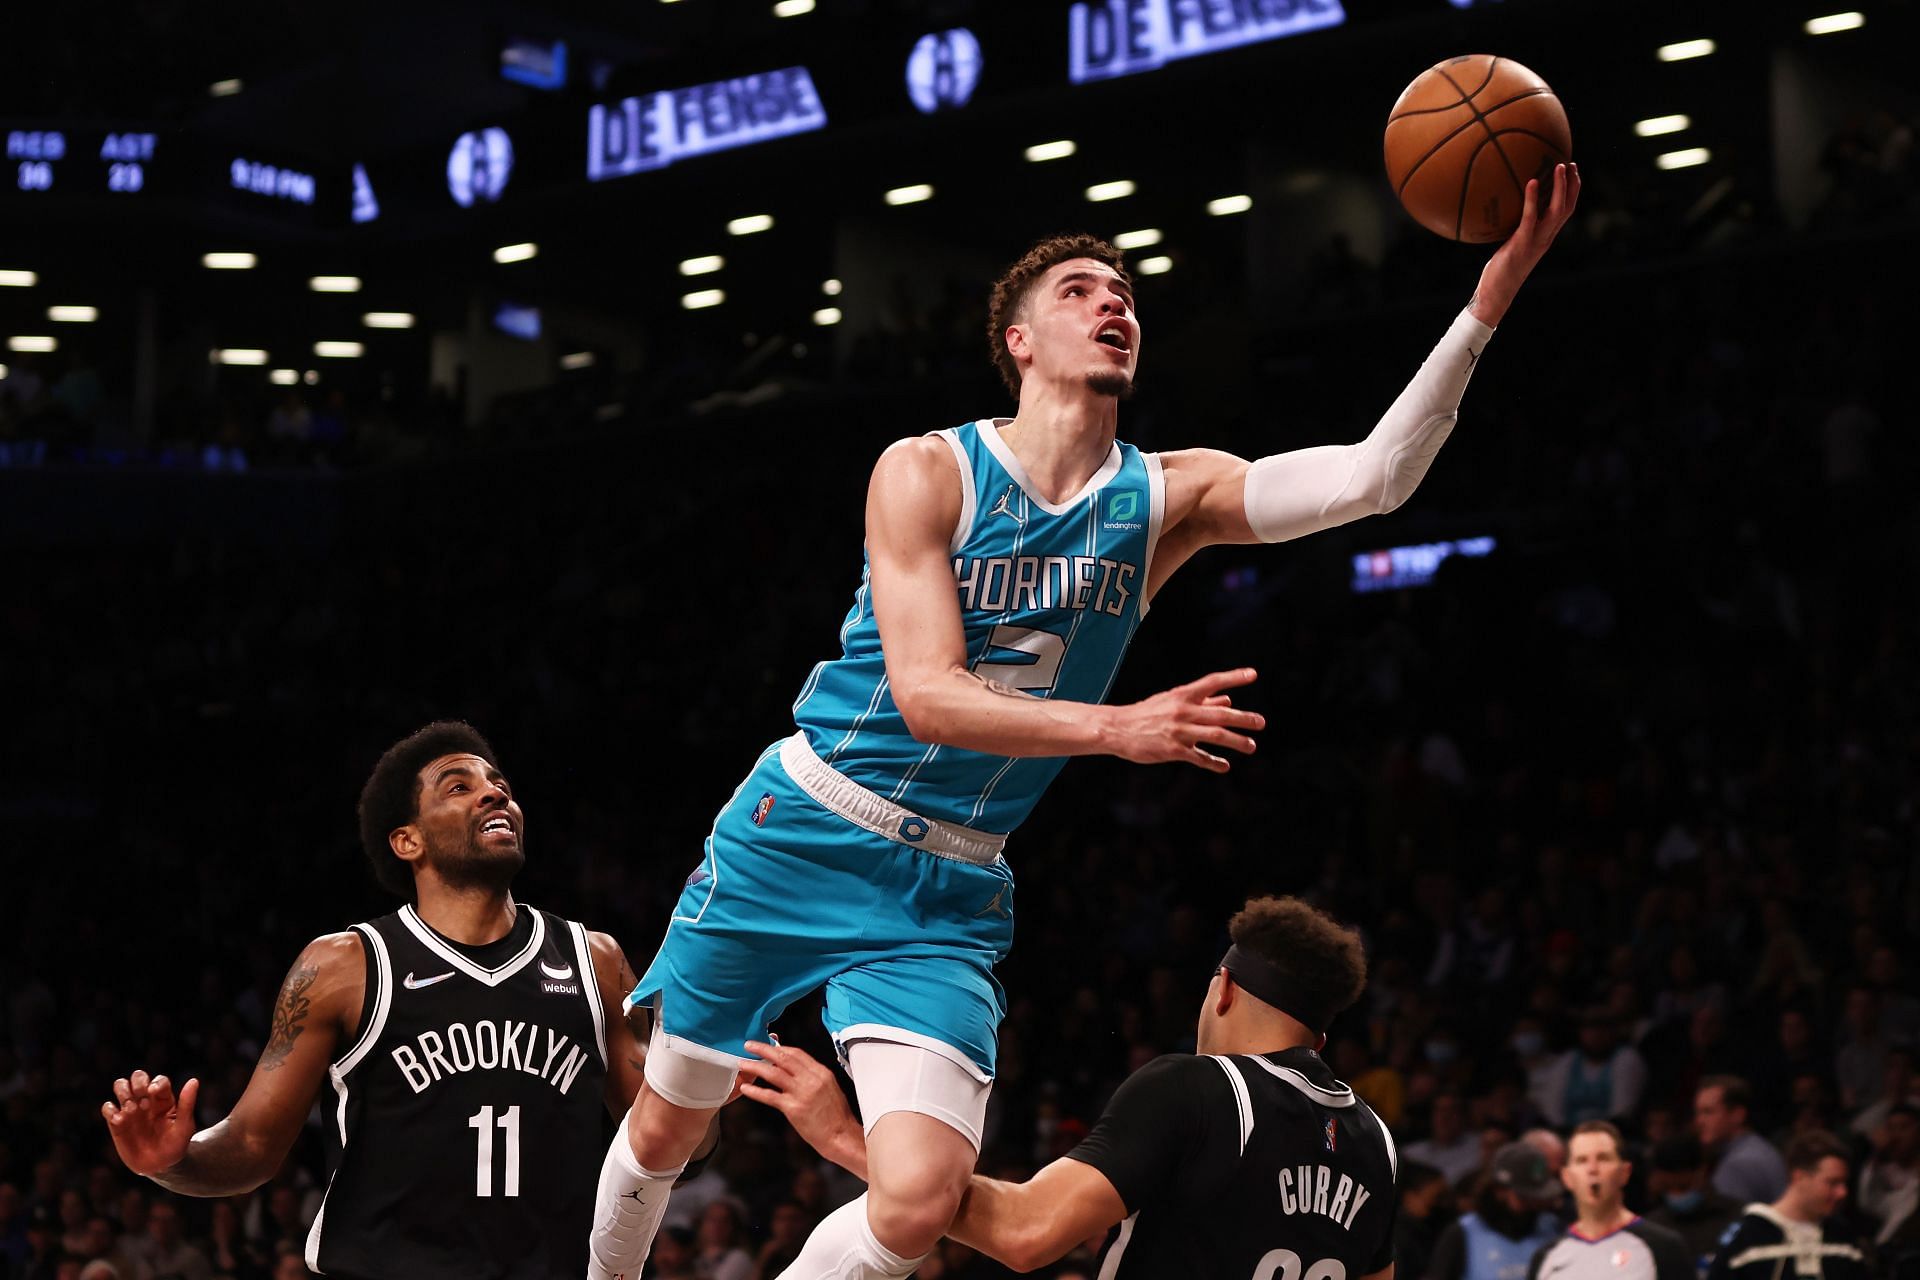 LaMelo Ball of the Charlotte Hornets drives to the basket against Kyrie Irving (11) of the Brooklyn Nets at Barclays Center on Sunday in New York City.